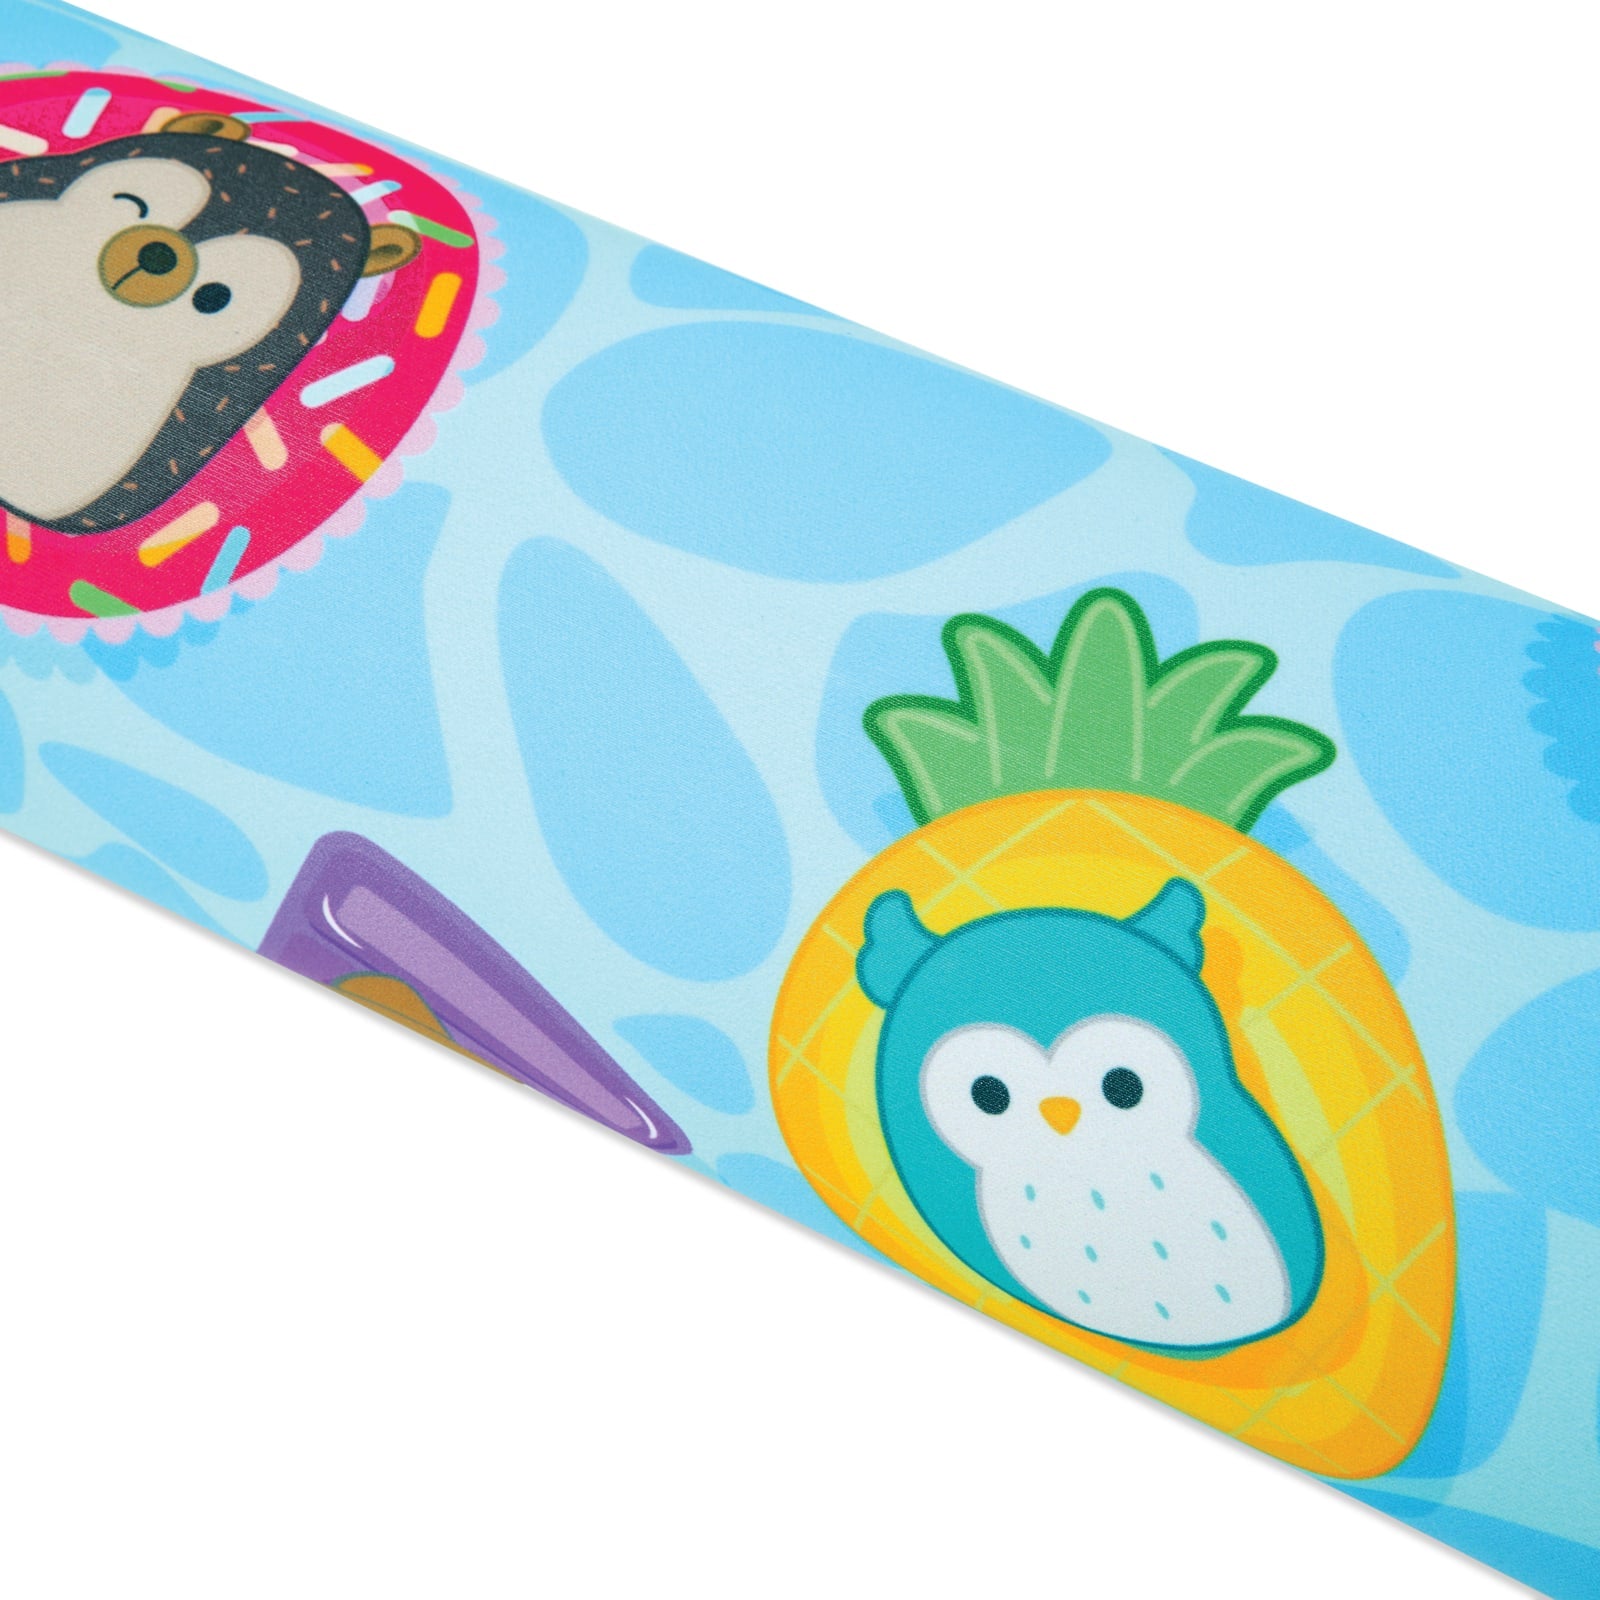 BigMouth x Squishmallows Pool Noodle (collection)